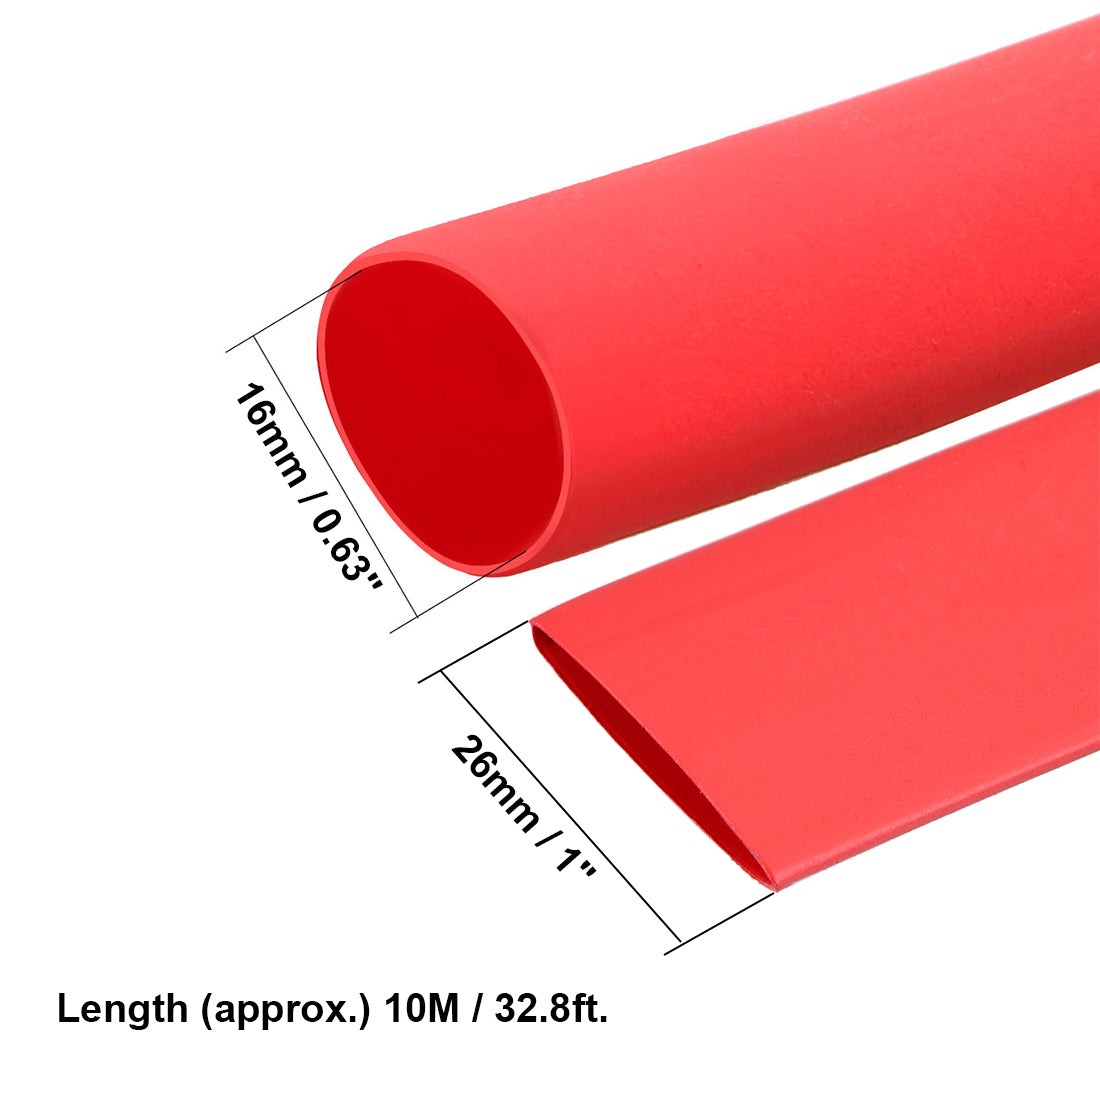 uxcell Uxcell Heat Shrink Tube 2:1 Electrical Insulation Tube Wire Cable Tubing Sleeving Wrap Red 16mm Diameter 5m Long